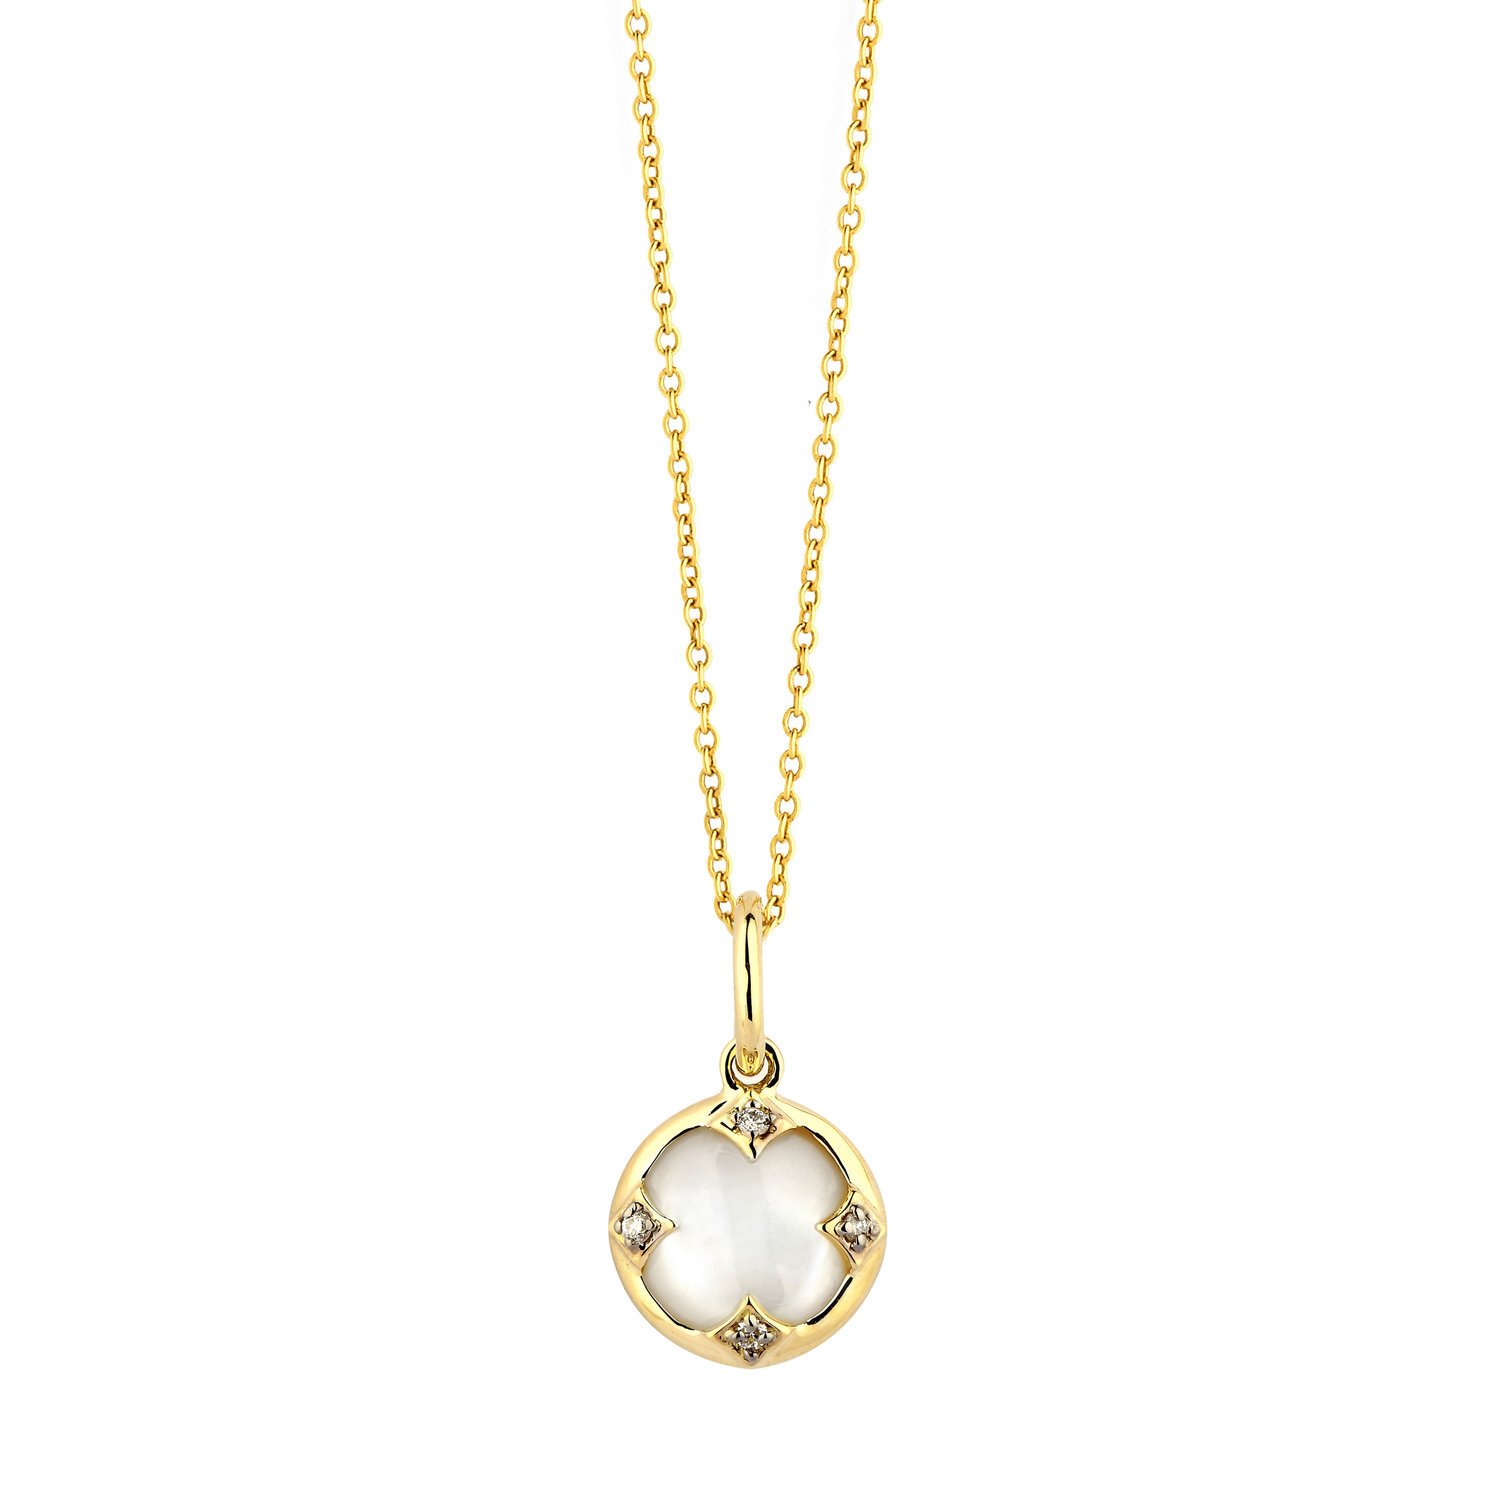 MOTHER OF PEARL & DIAMOND MOGUL NECKLACE